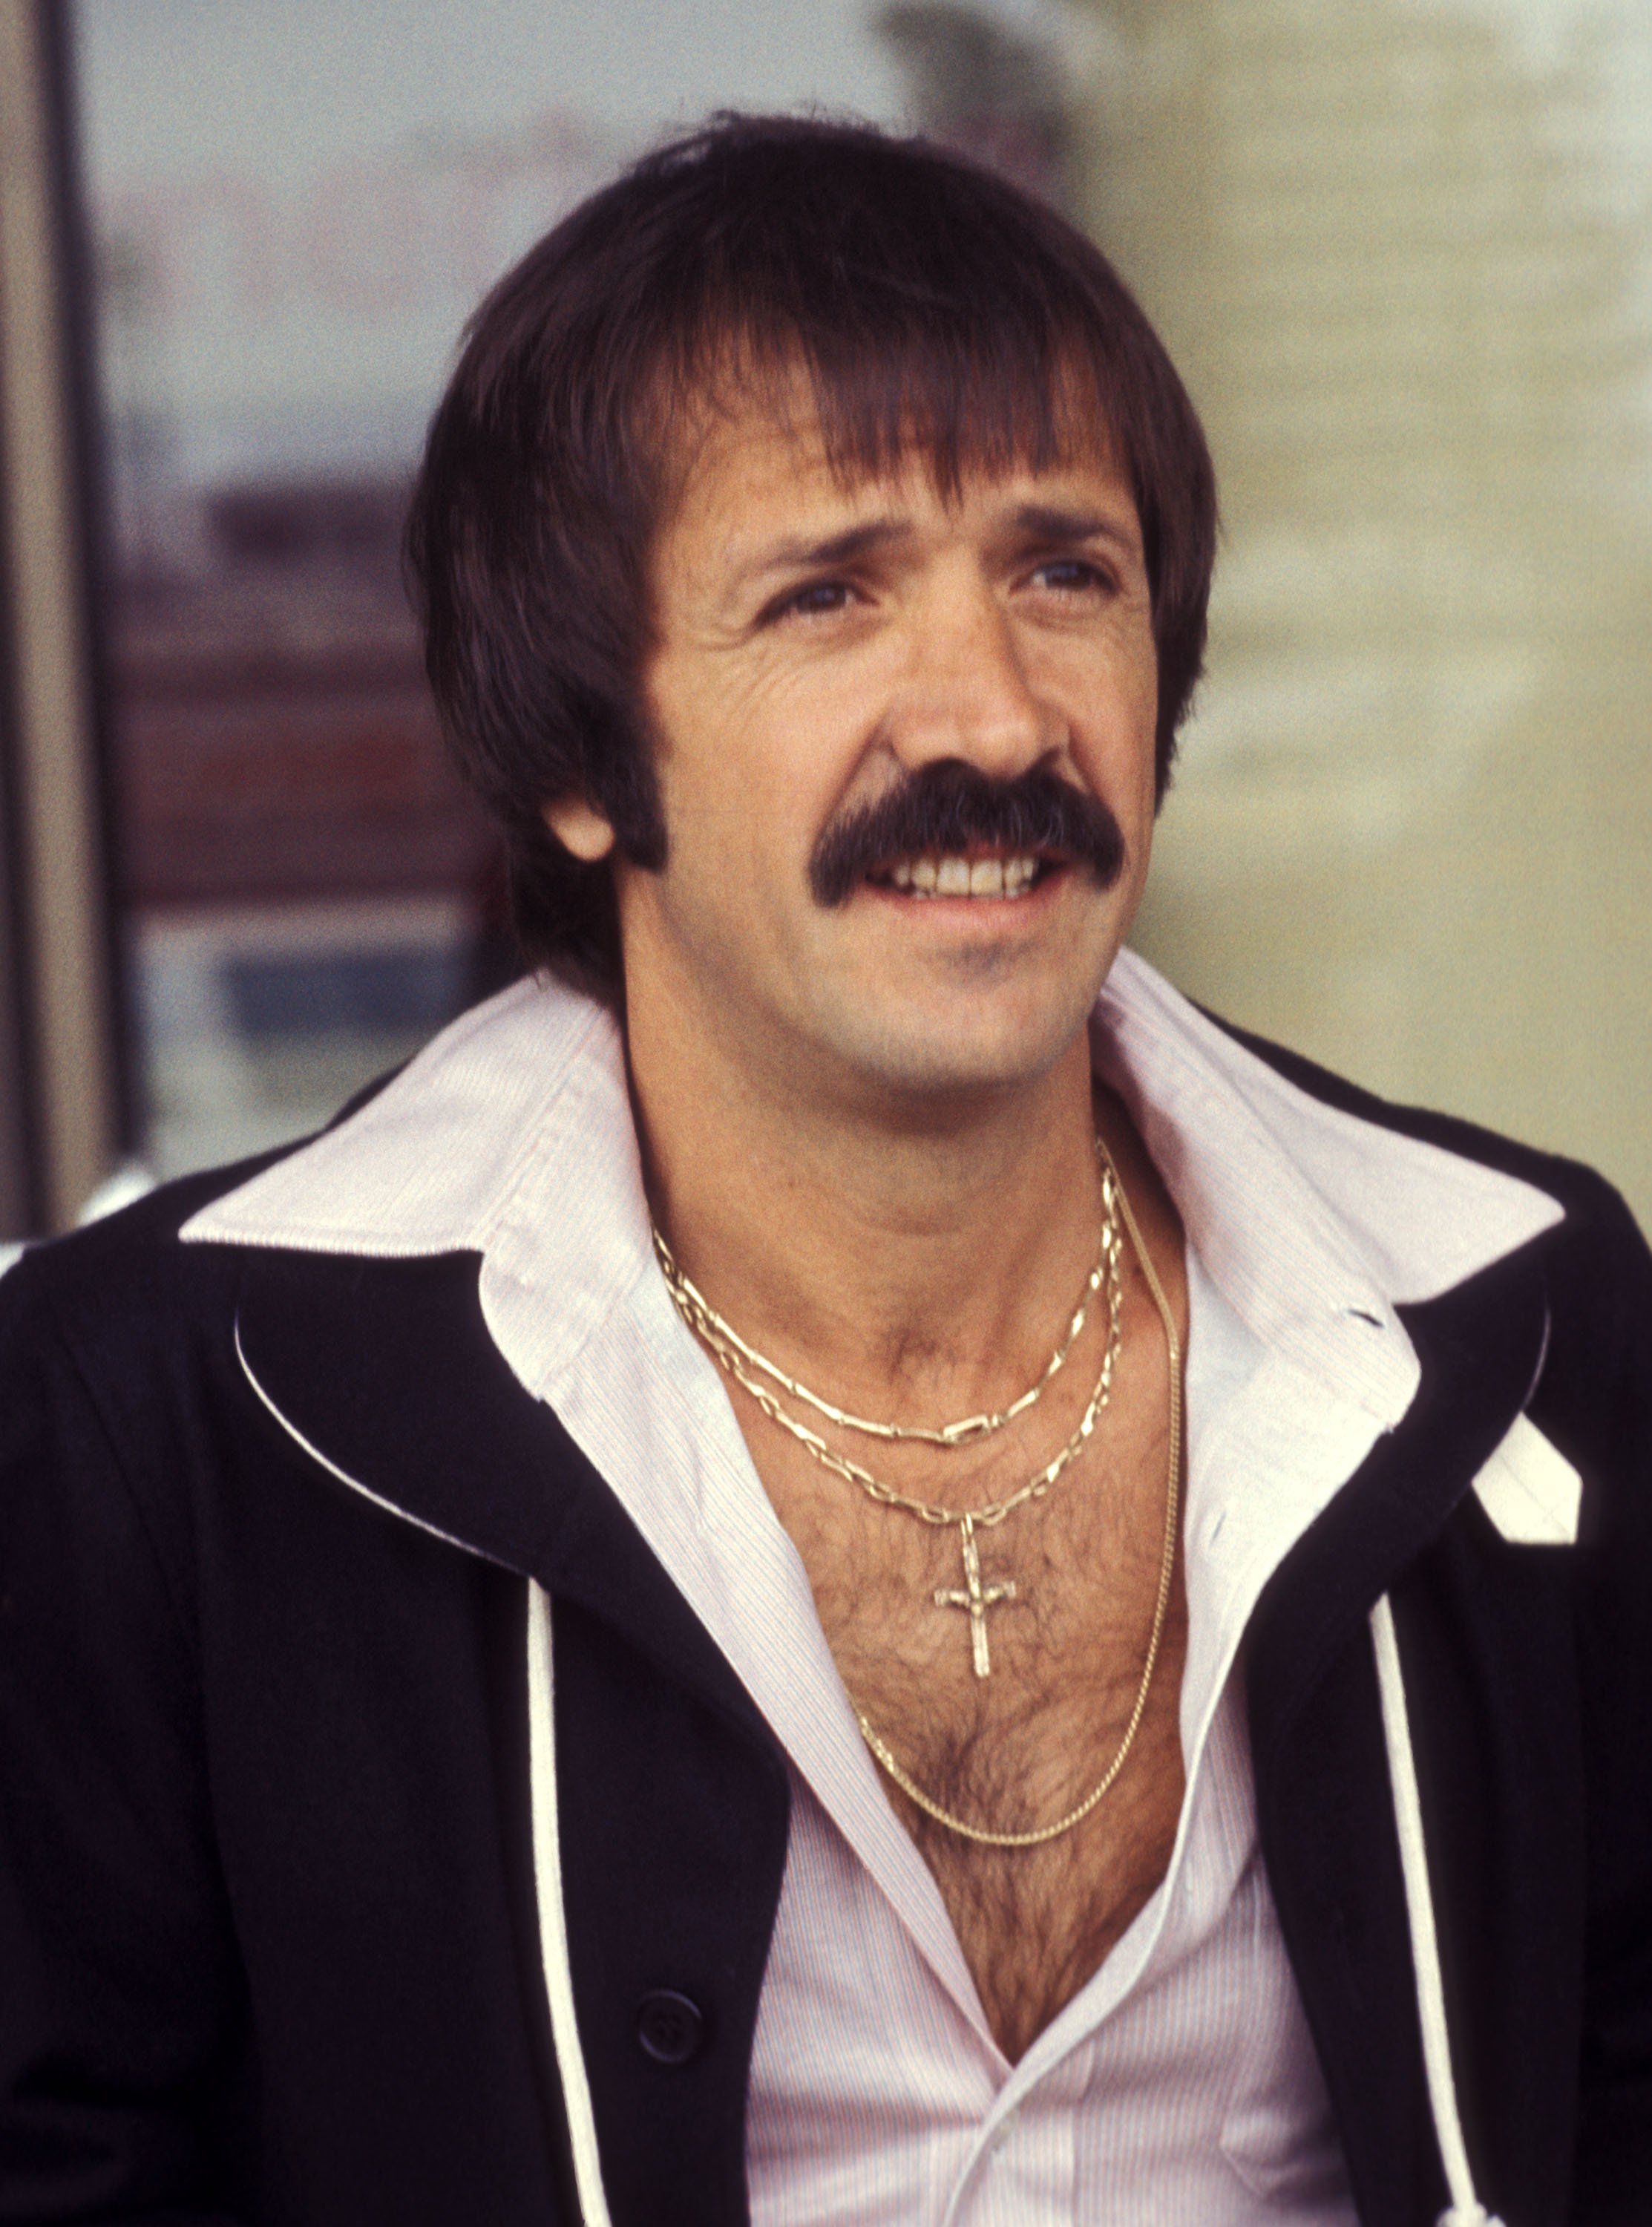 Singer Sonny Bono arrives at Los Angeles International Airport in Los Angeles, California June 12, 1977 |  Source: Getty Images